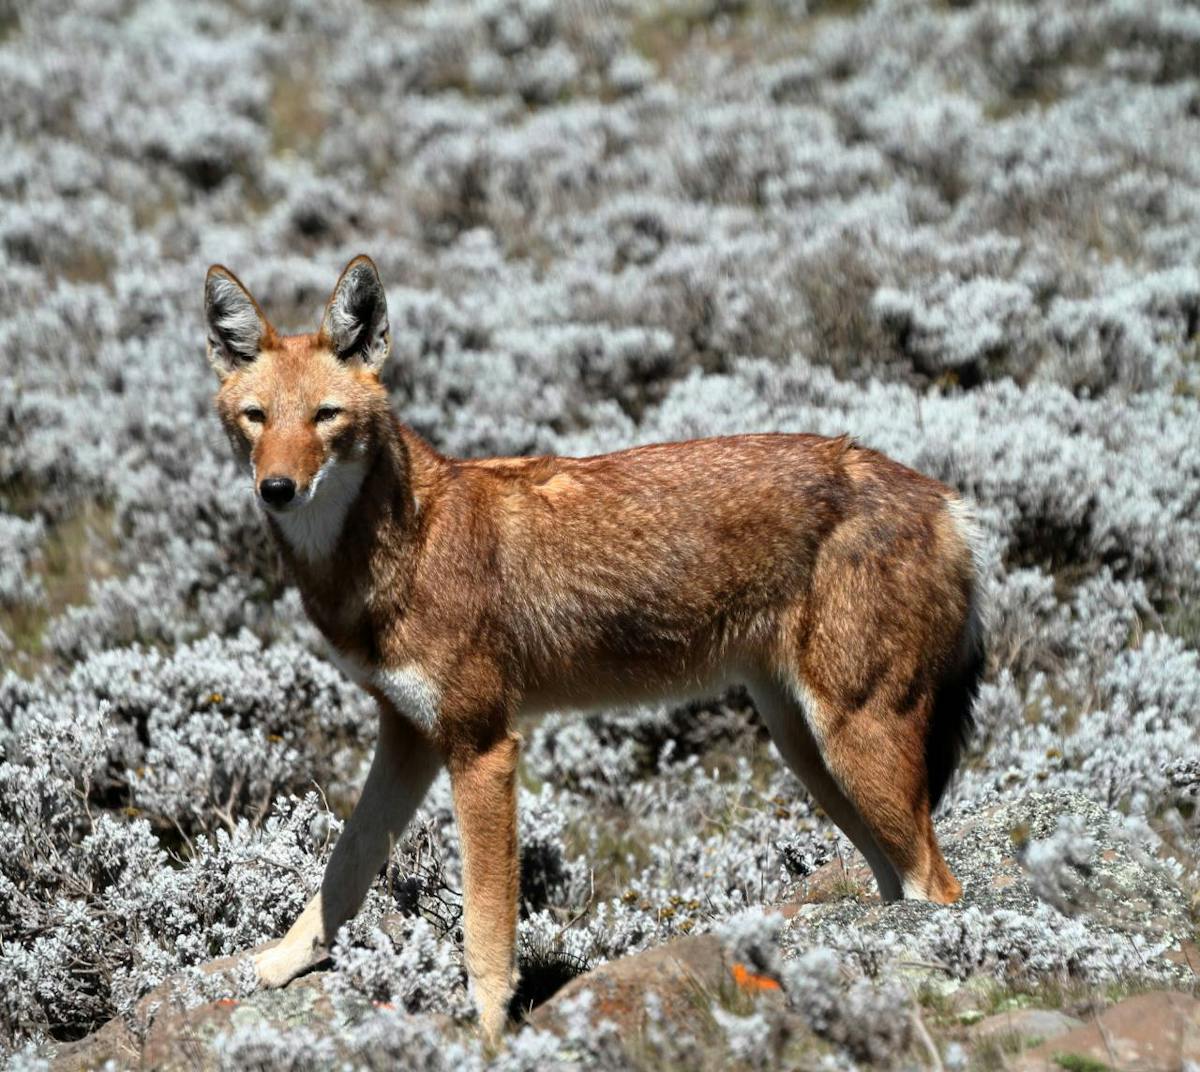 The Ethiopian wolf: meet Africa's fascinating most endangered carnivore